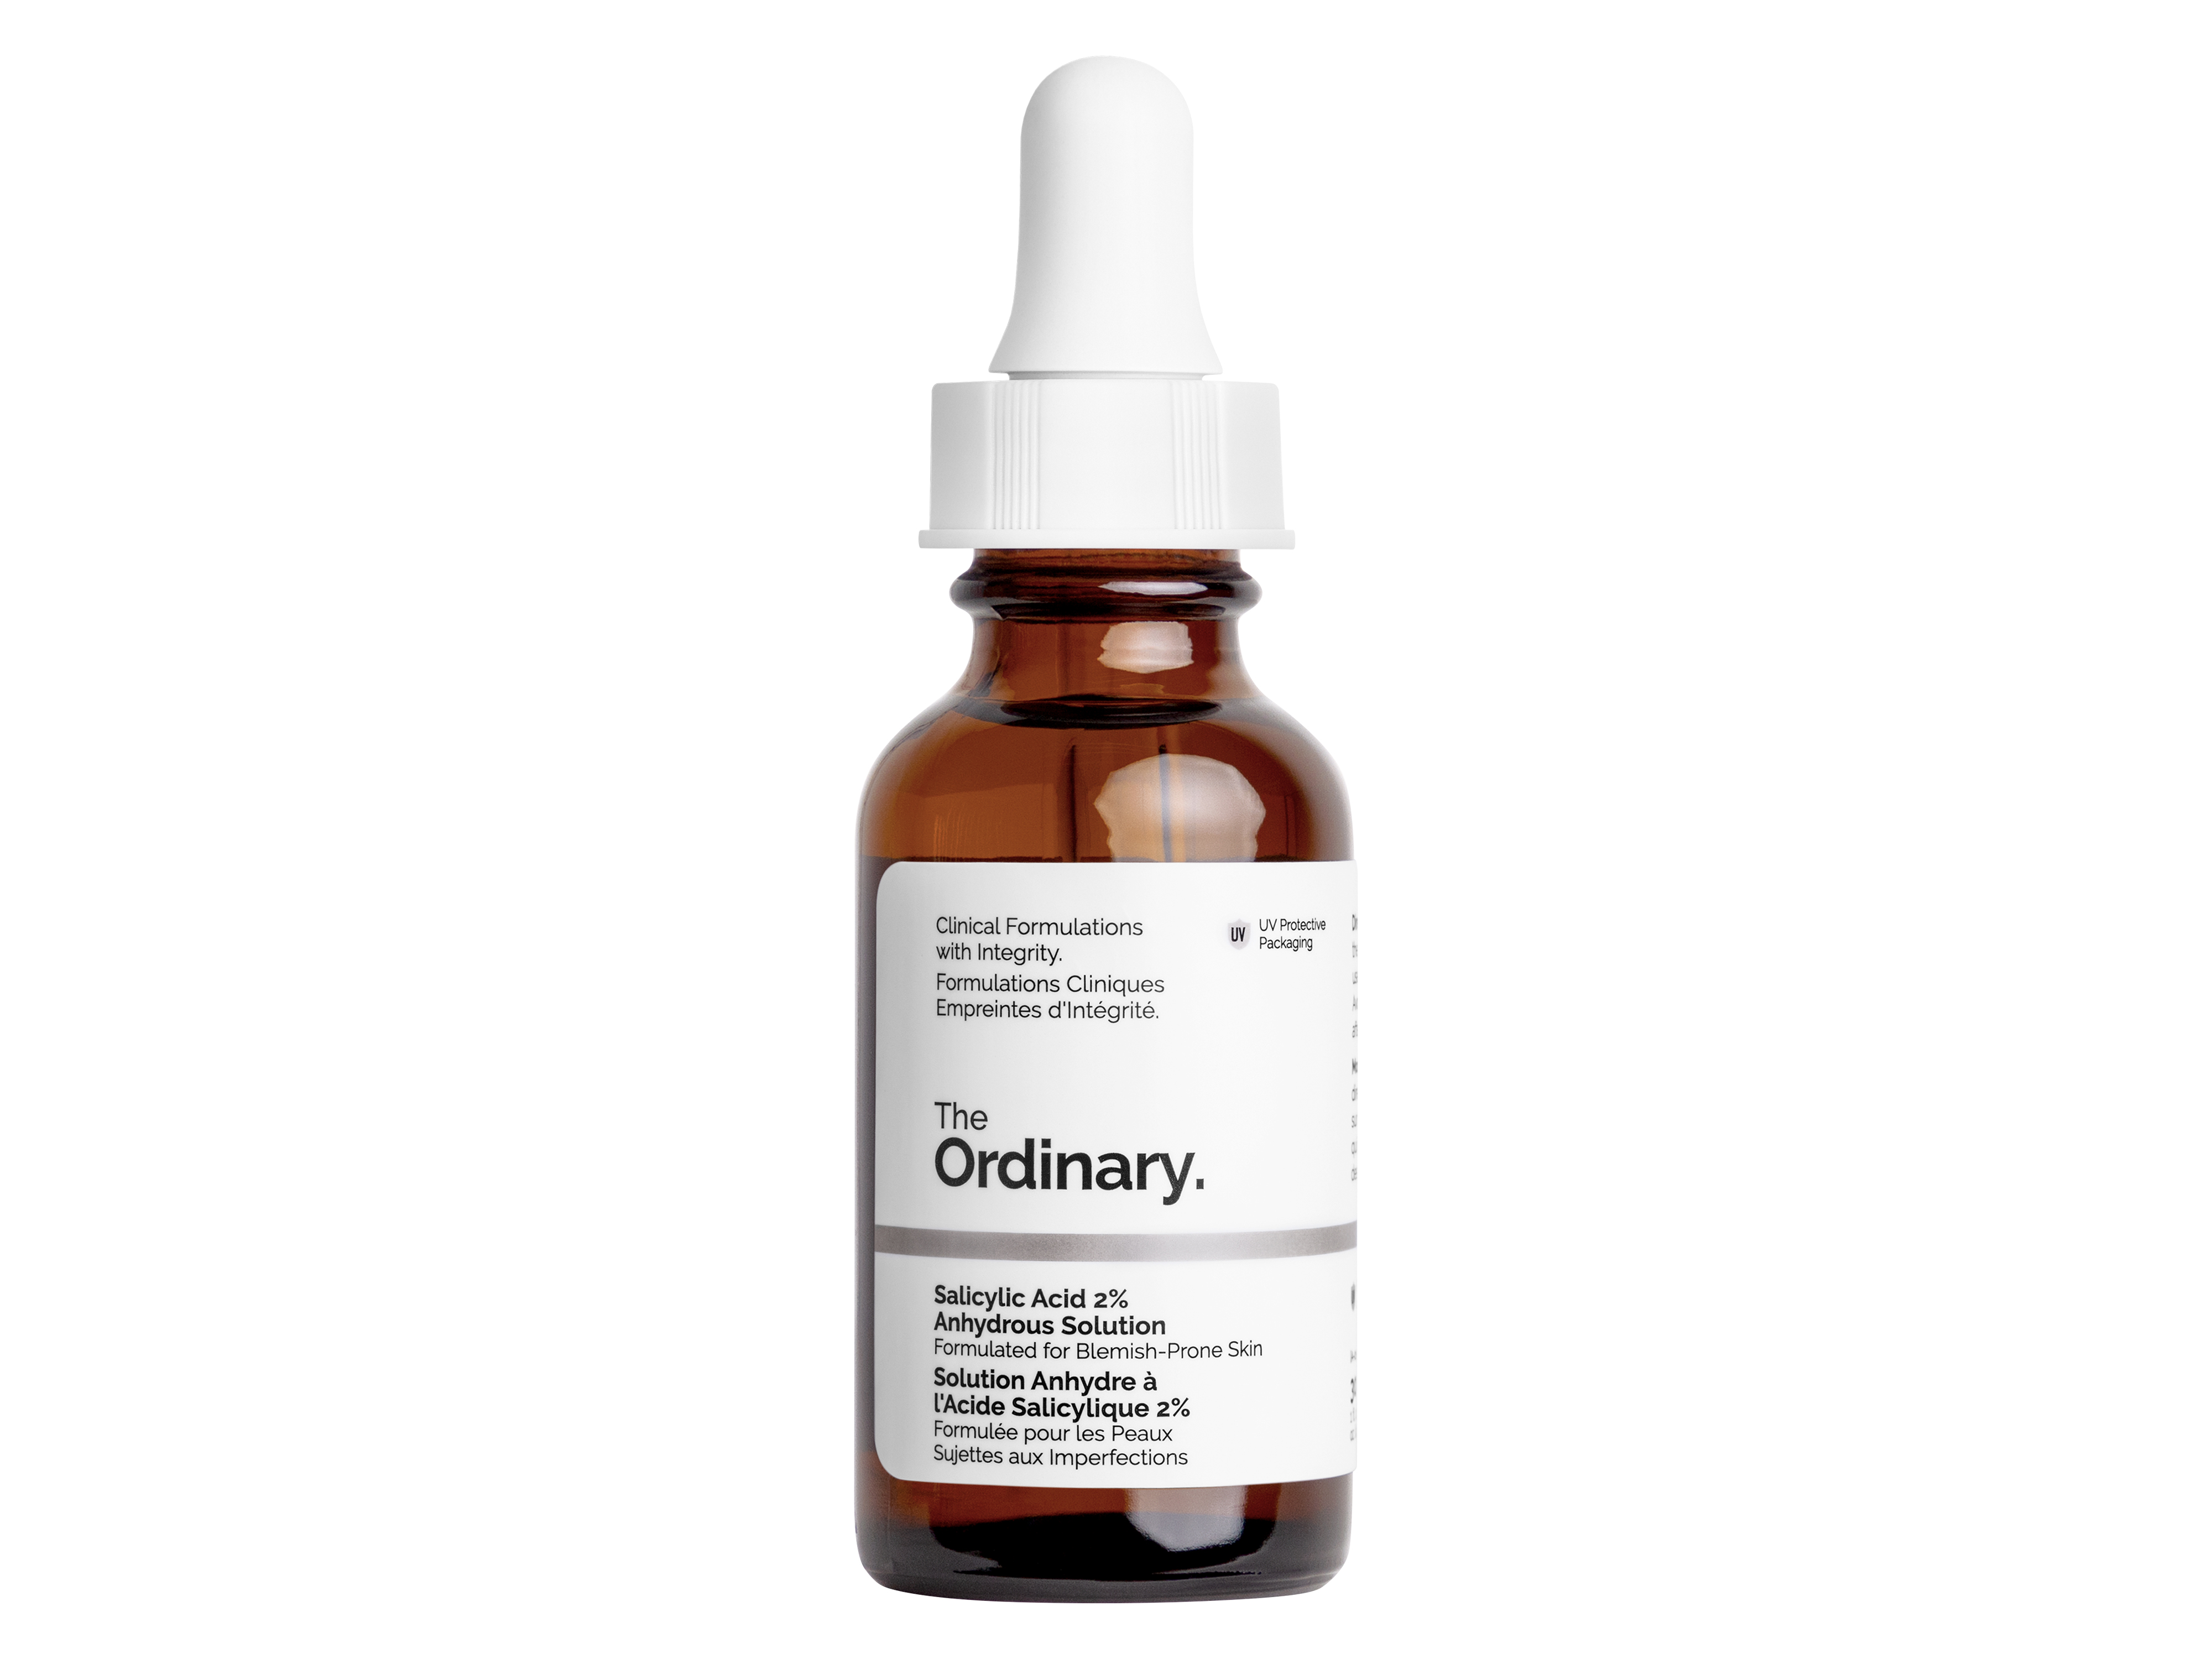 The Ordinary Salicylic Acid 2 % Anhydrous Solution, 30 ml